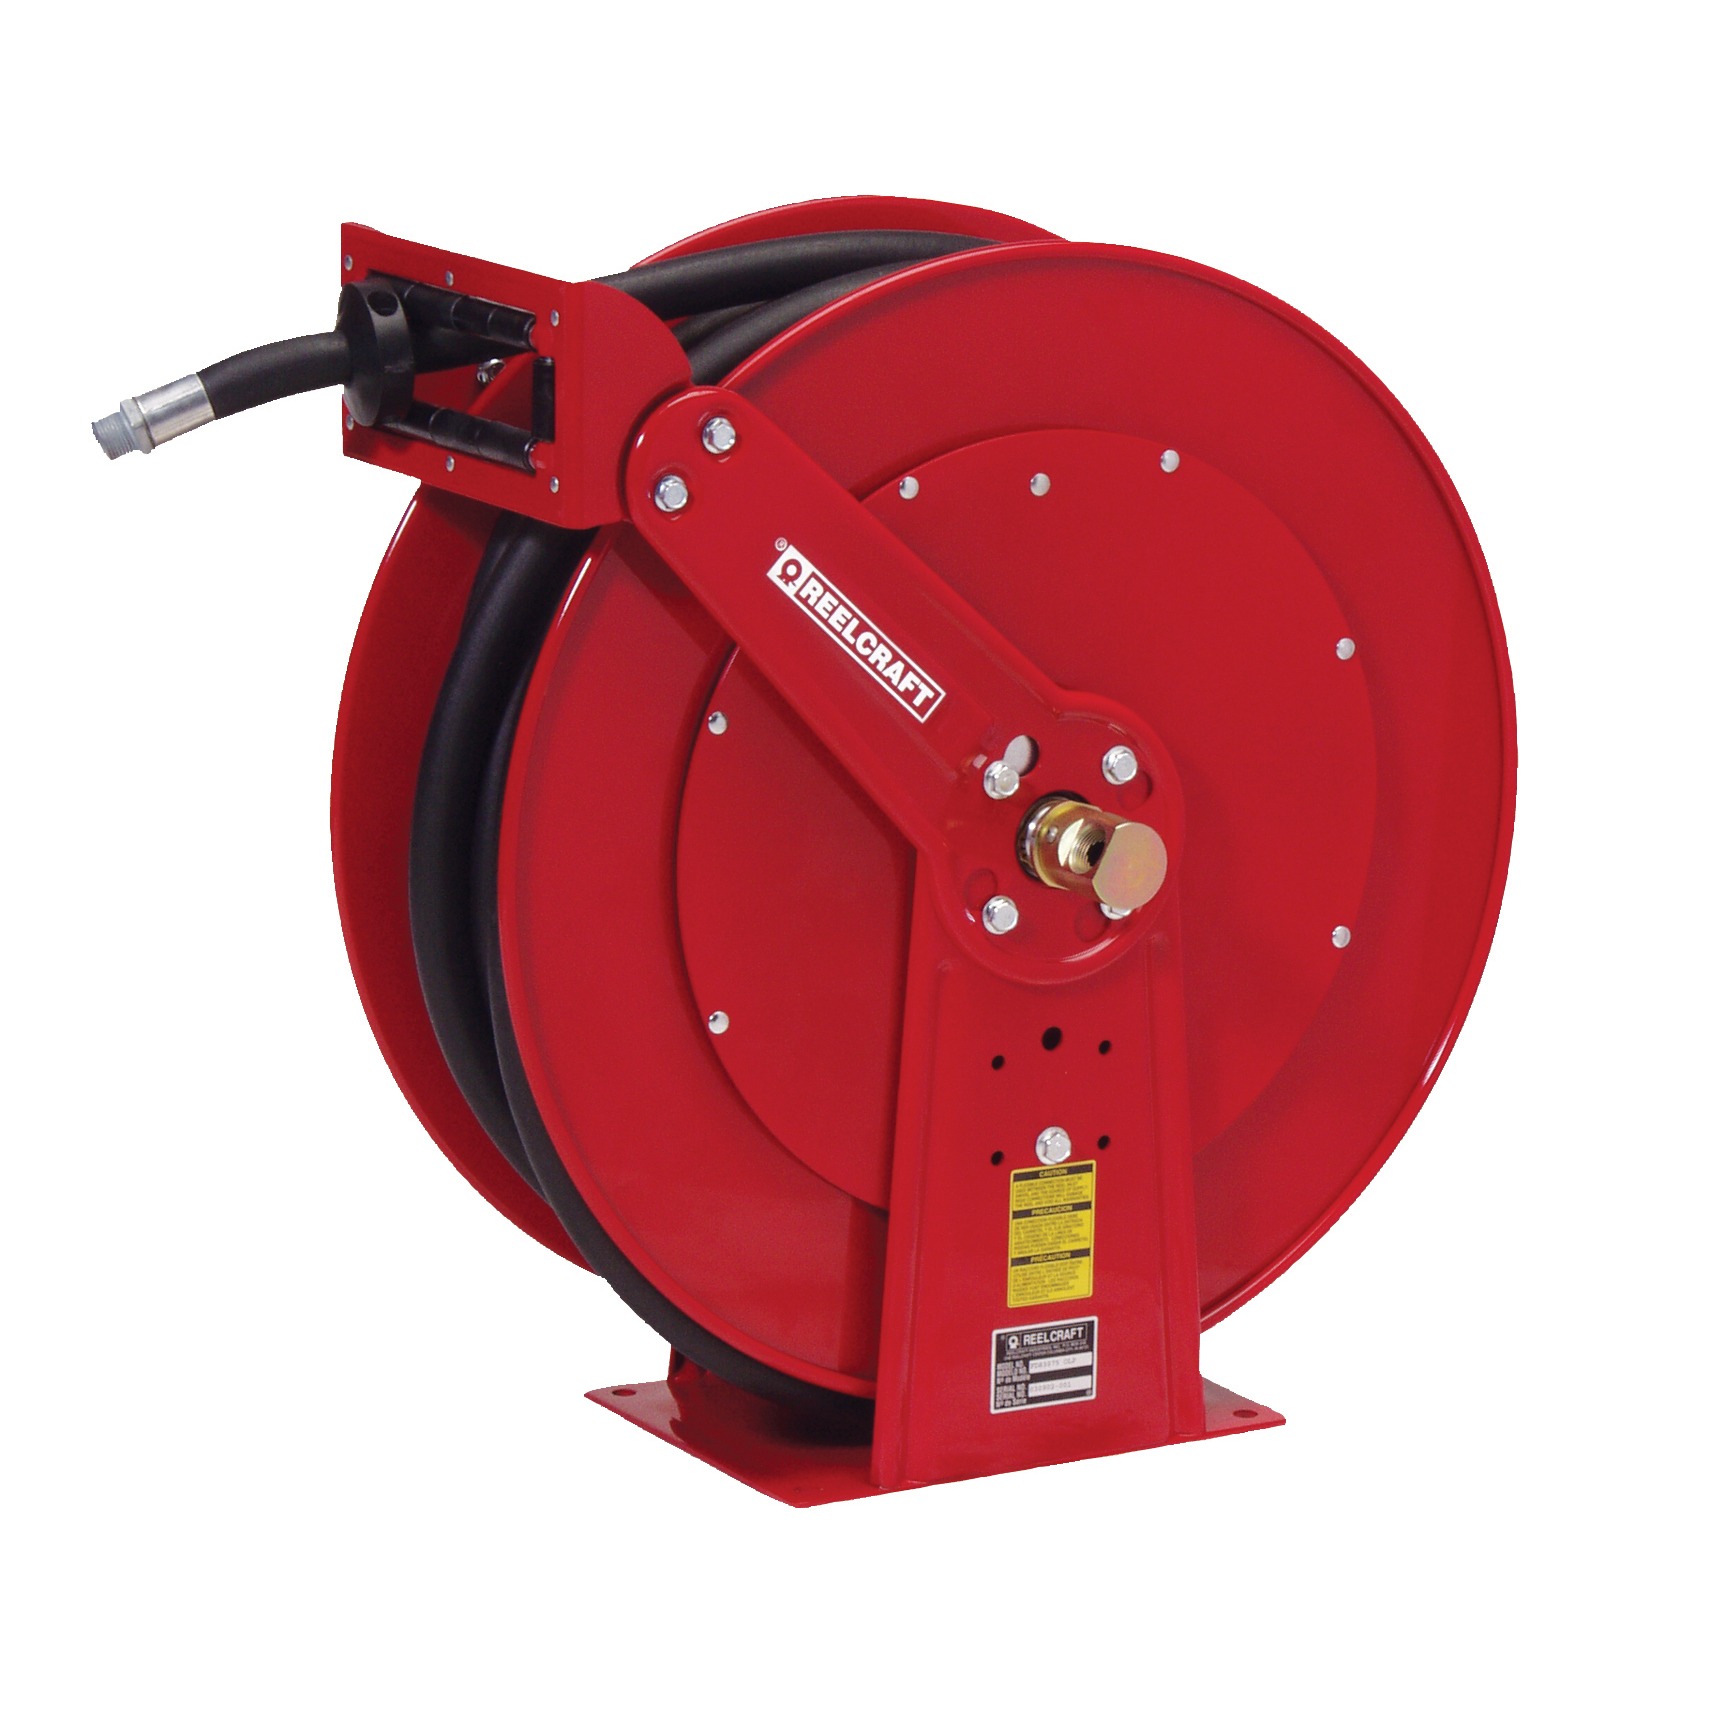 VEVOR Fuel Hose Reel, 3/4 x 50' Extra Long Retractable Diesel Hose Reel, Heavy-Duty Steel Construction with Automatic Refueling Gun, Rubber Hose